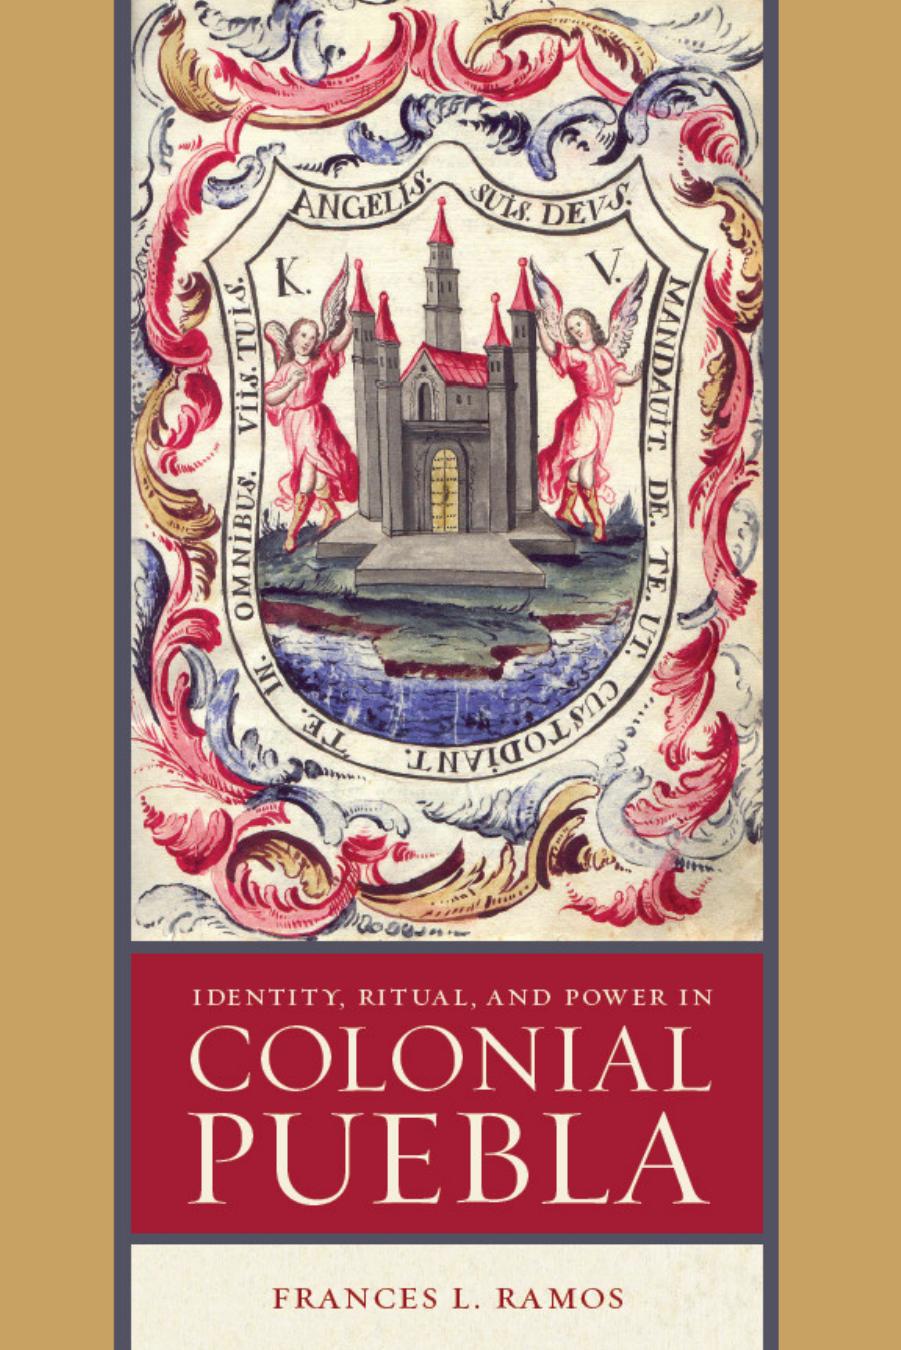 Identity, Ritual, and Power in Colonial Puebla by Frances L. Ramos